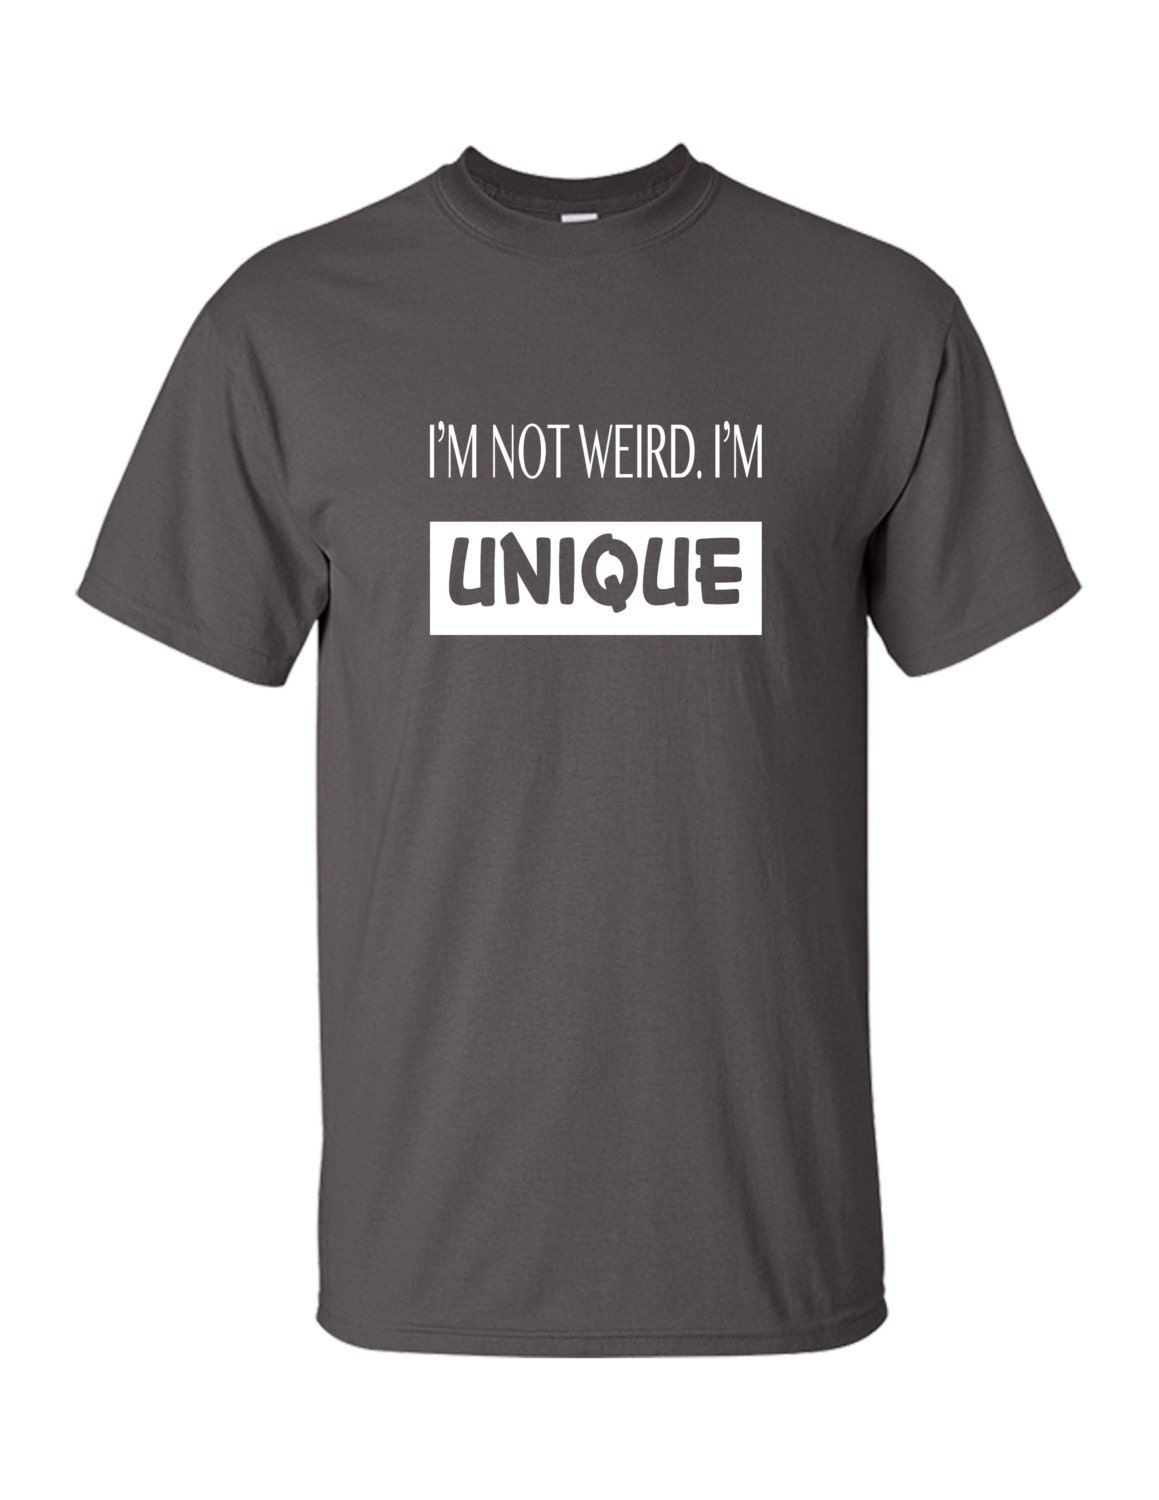 I'm not Weird I'm Unique T-shirt by Trasbor on Etsy